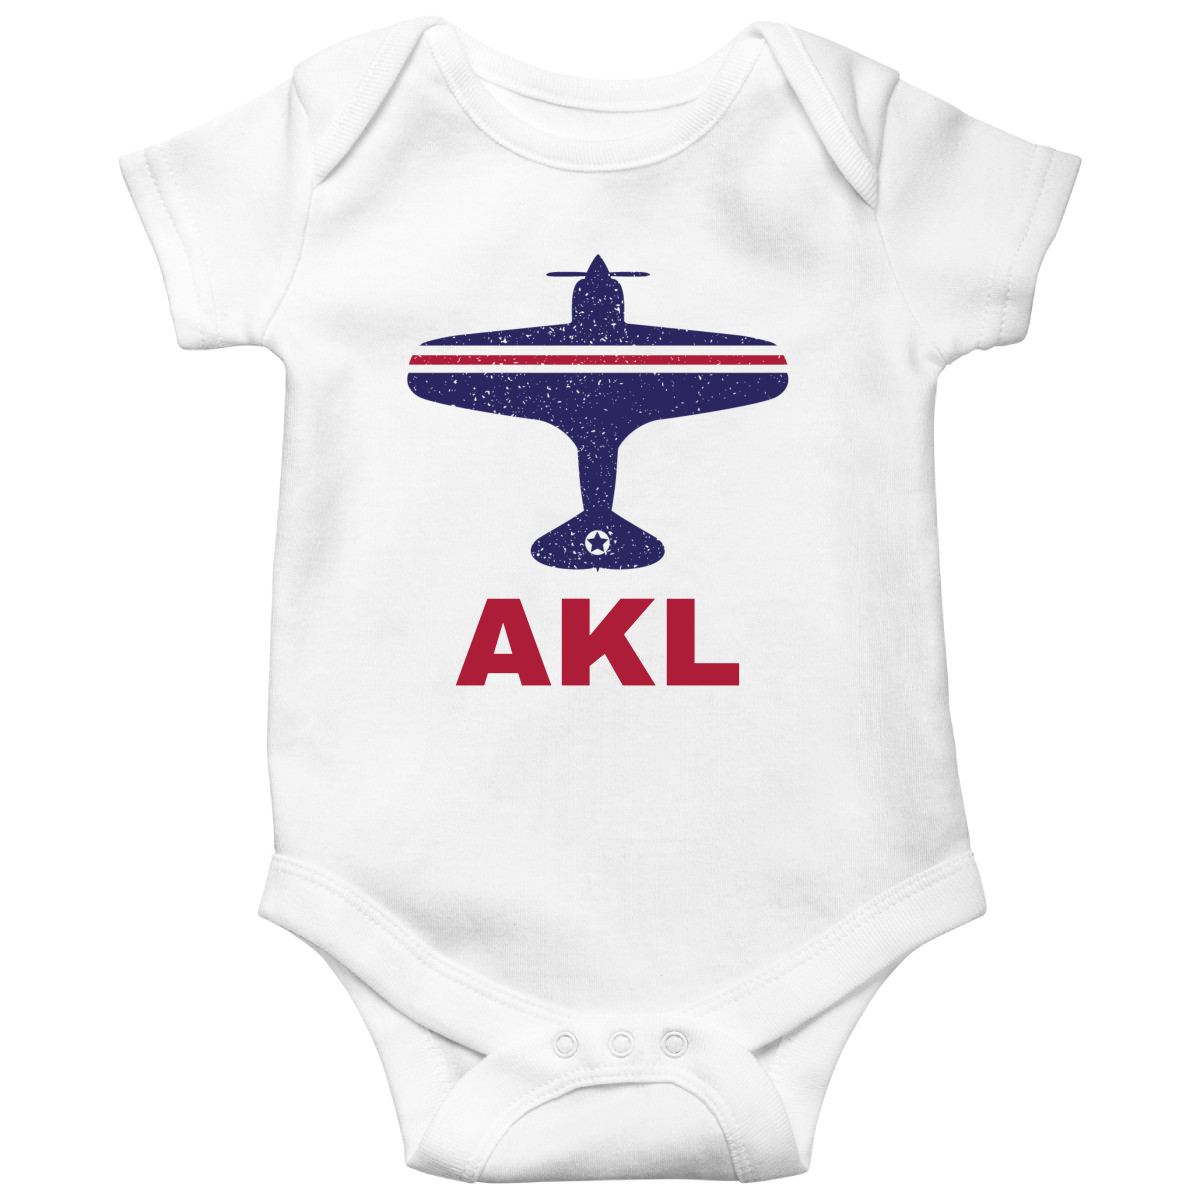 Fly Auckland AKL Airport Baby Bodysuits | White